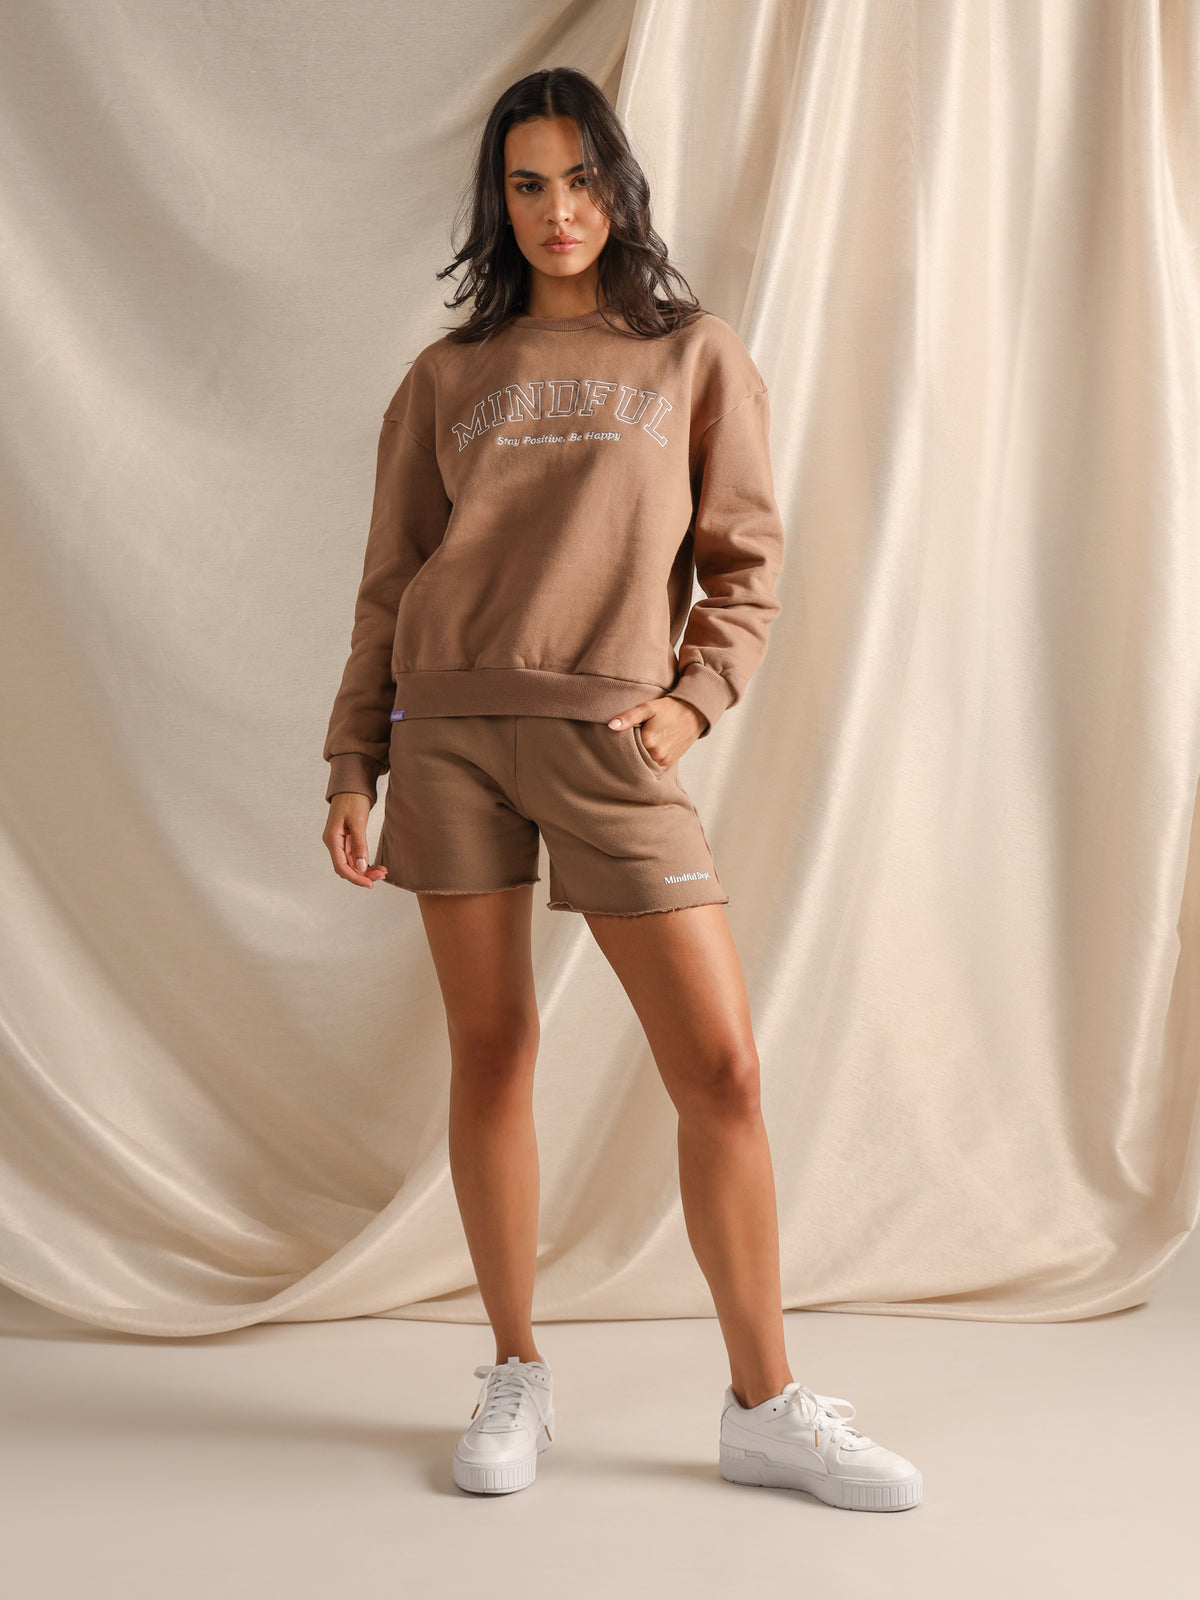 Relaxo Sweater in Taupe